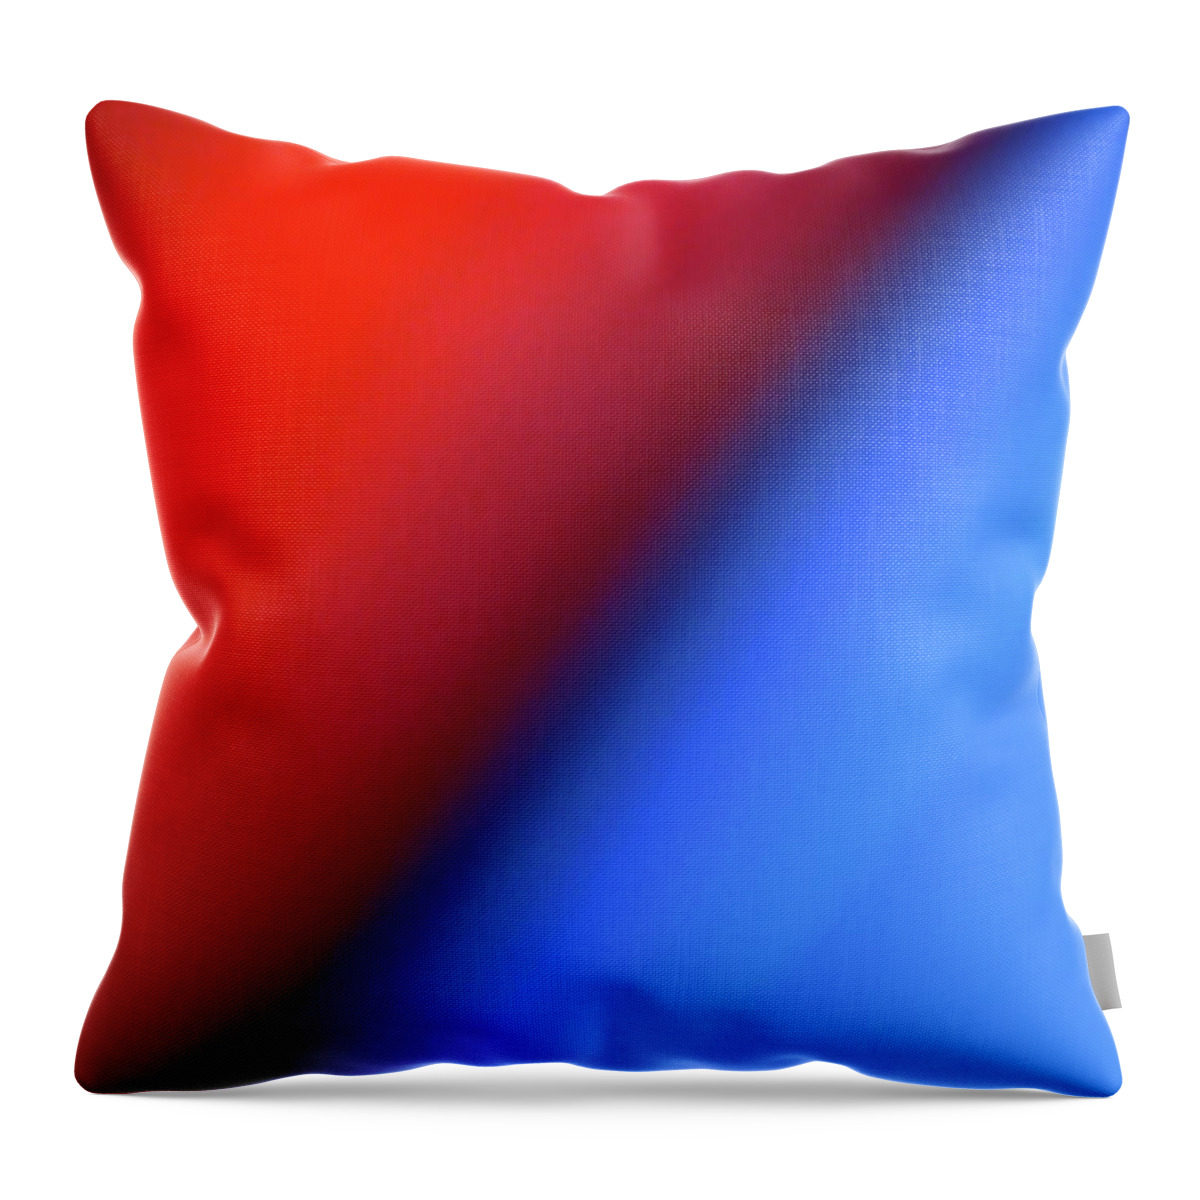 Cml Brown Throw Pillow featuring the photograph Red Blue by CML Brown